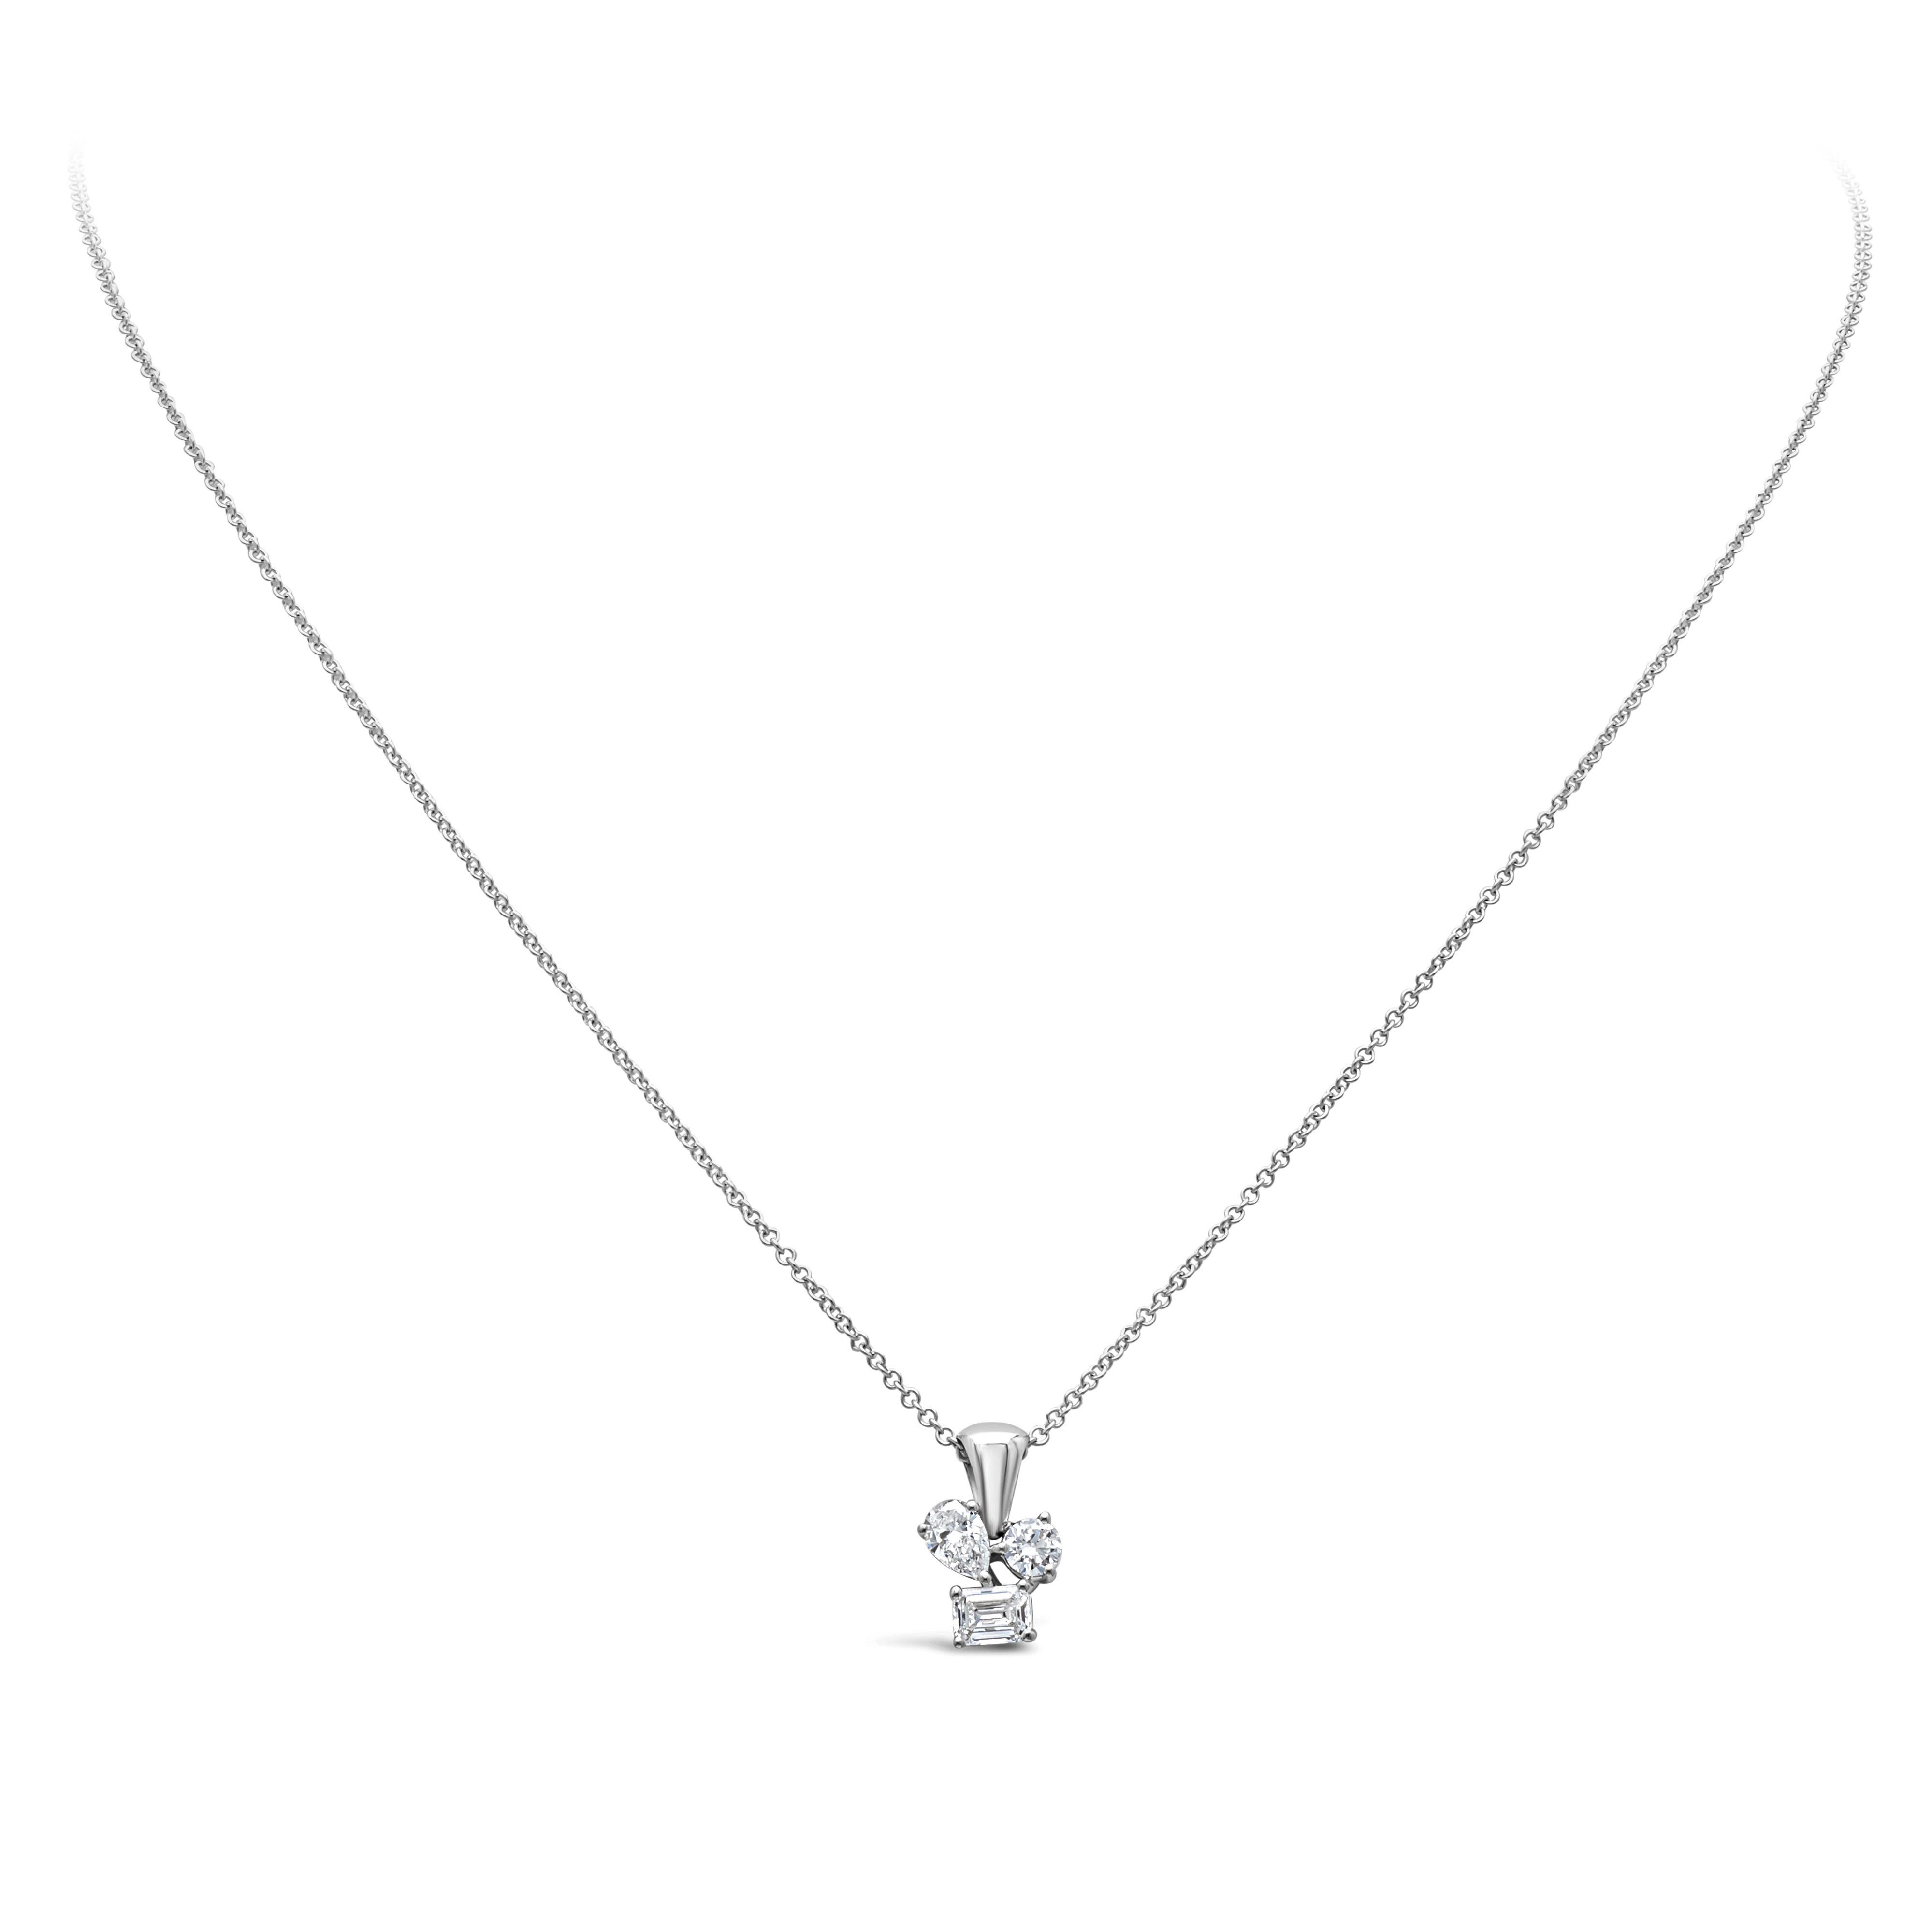 A simple pendant necklace showcasing pear, round and emerald mixed-cut diamonds, set in a 18K White Gold. Diamonds weigh 0.60 carats total, F color and SI in clarity. Suspended on a 18 inch 14K White Gold chain. Perfect for your everyday use.